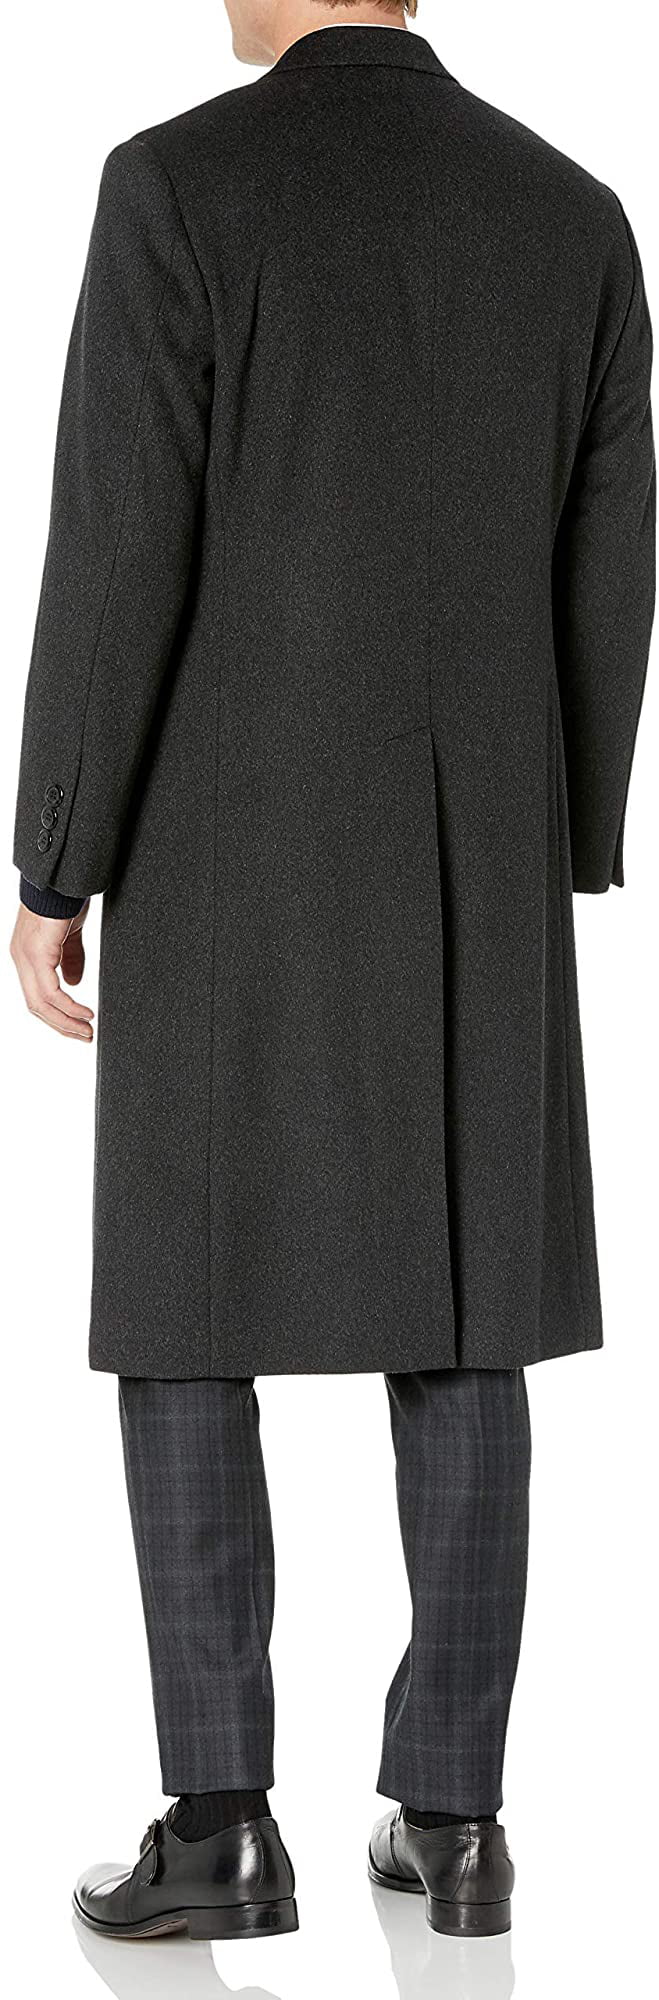 Available in Colors Adam Baker Mens Single Breasted Luxury Wool Full Length Topcoat 